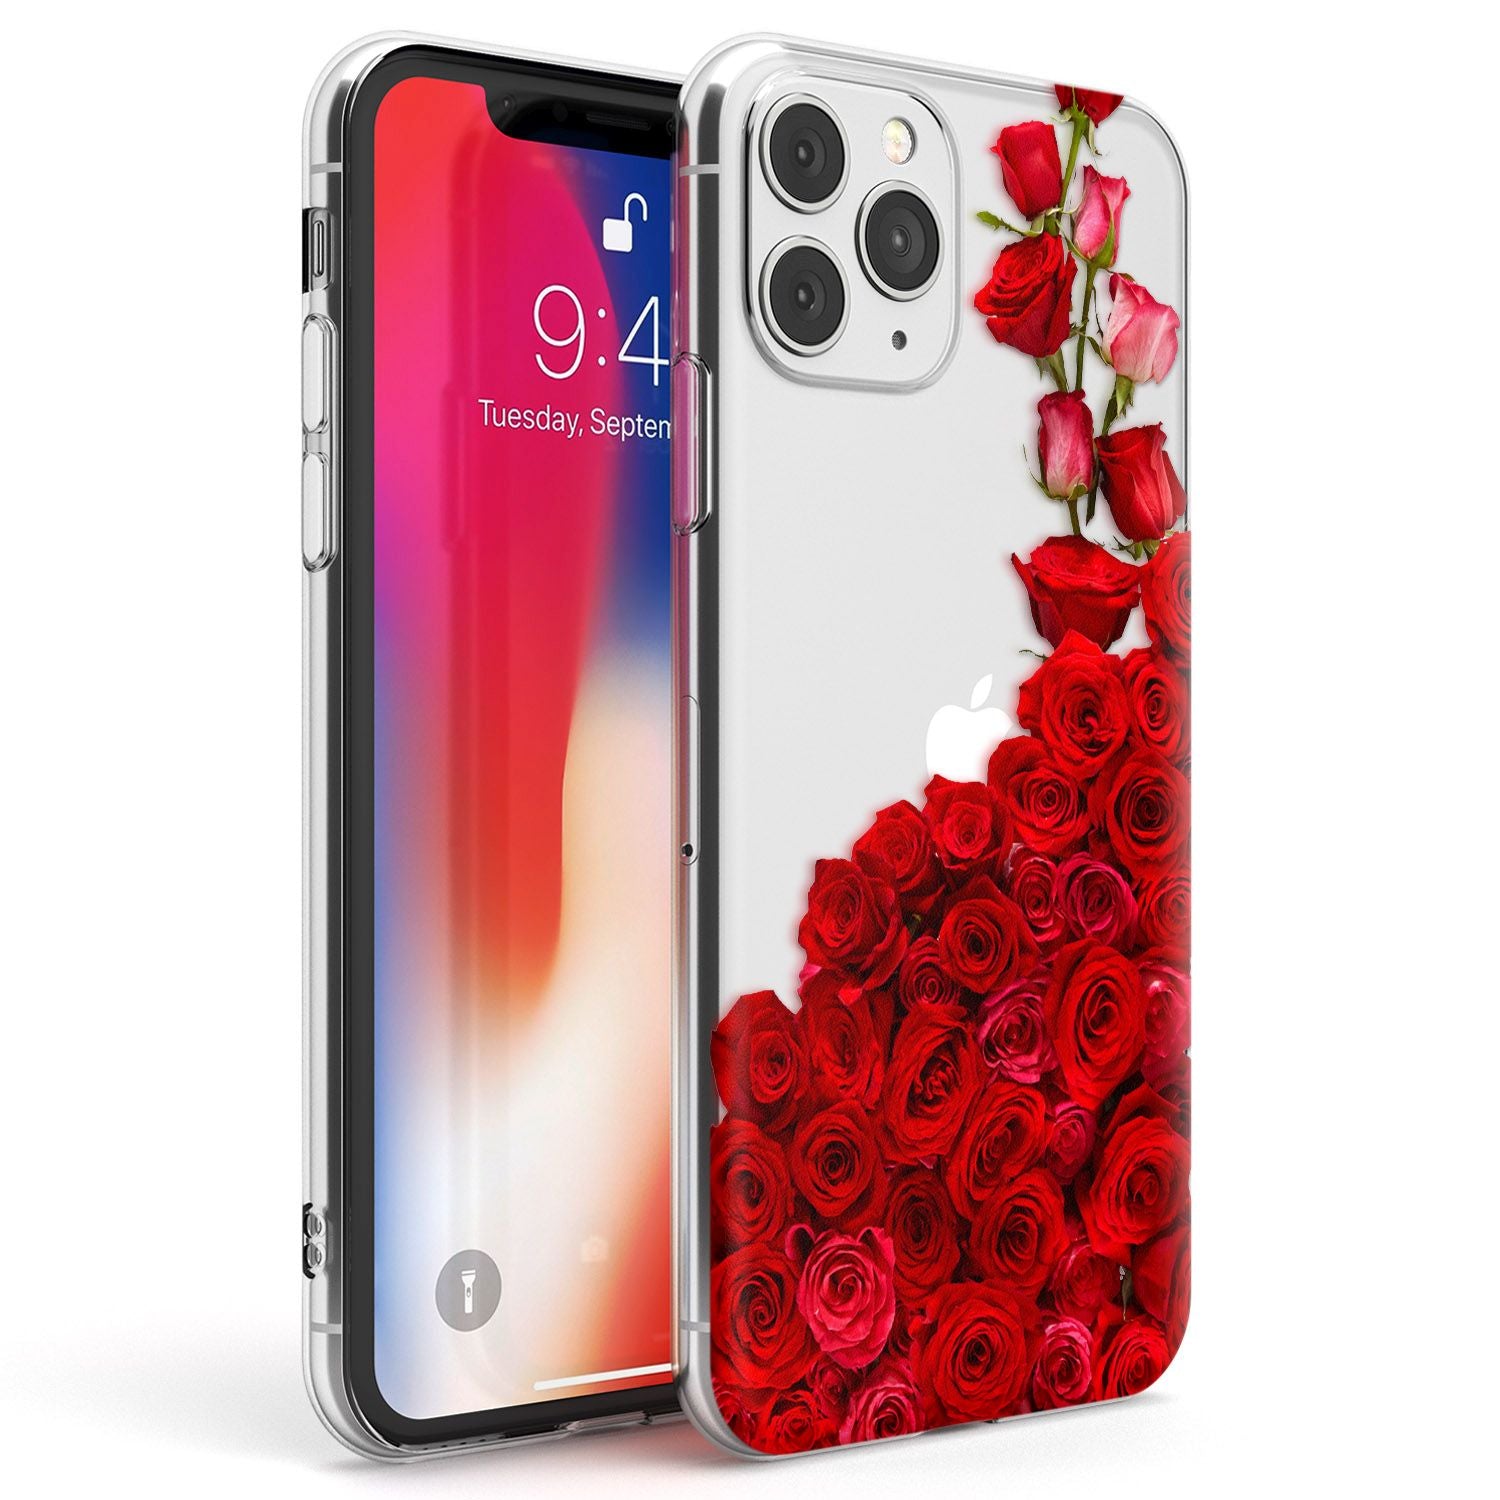 Floral Roses Phone Case iPhone 11 Pro Max / Clear Case,iPhone 11 Pro / Clear Case,iPhone 12 Pro Max / Clear Case,iPhone 12 Pro / Clear Case Blanc Space